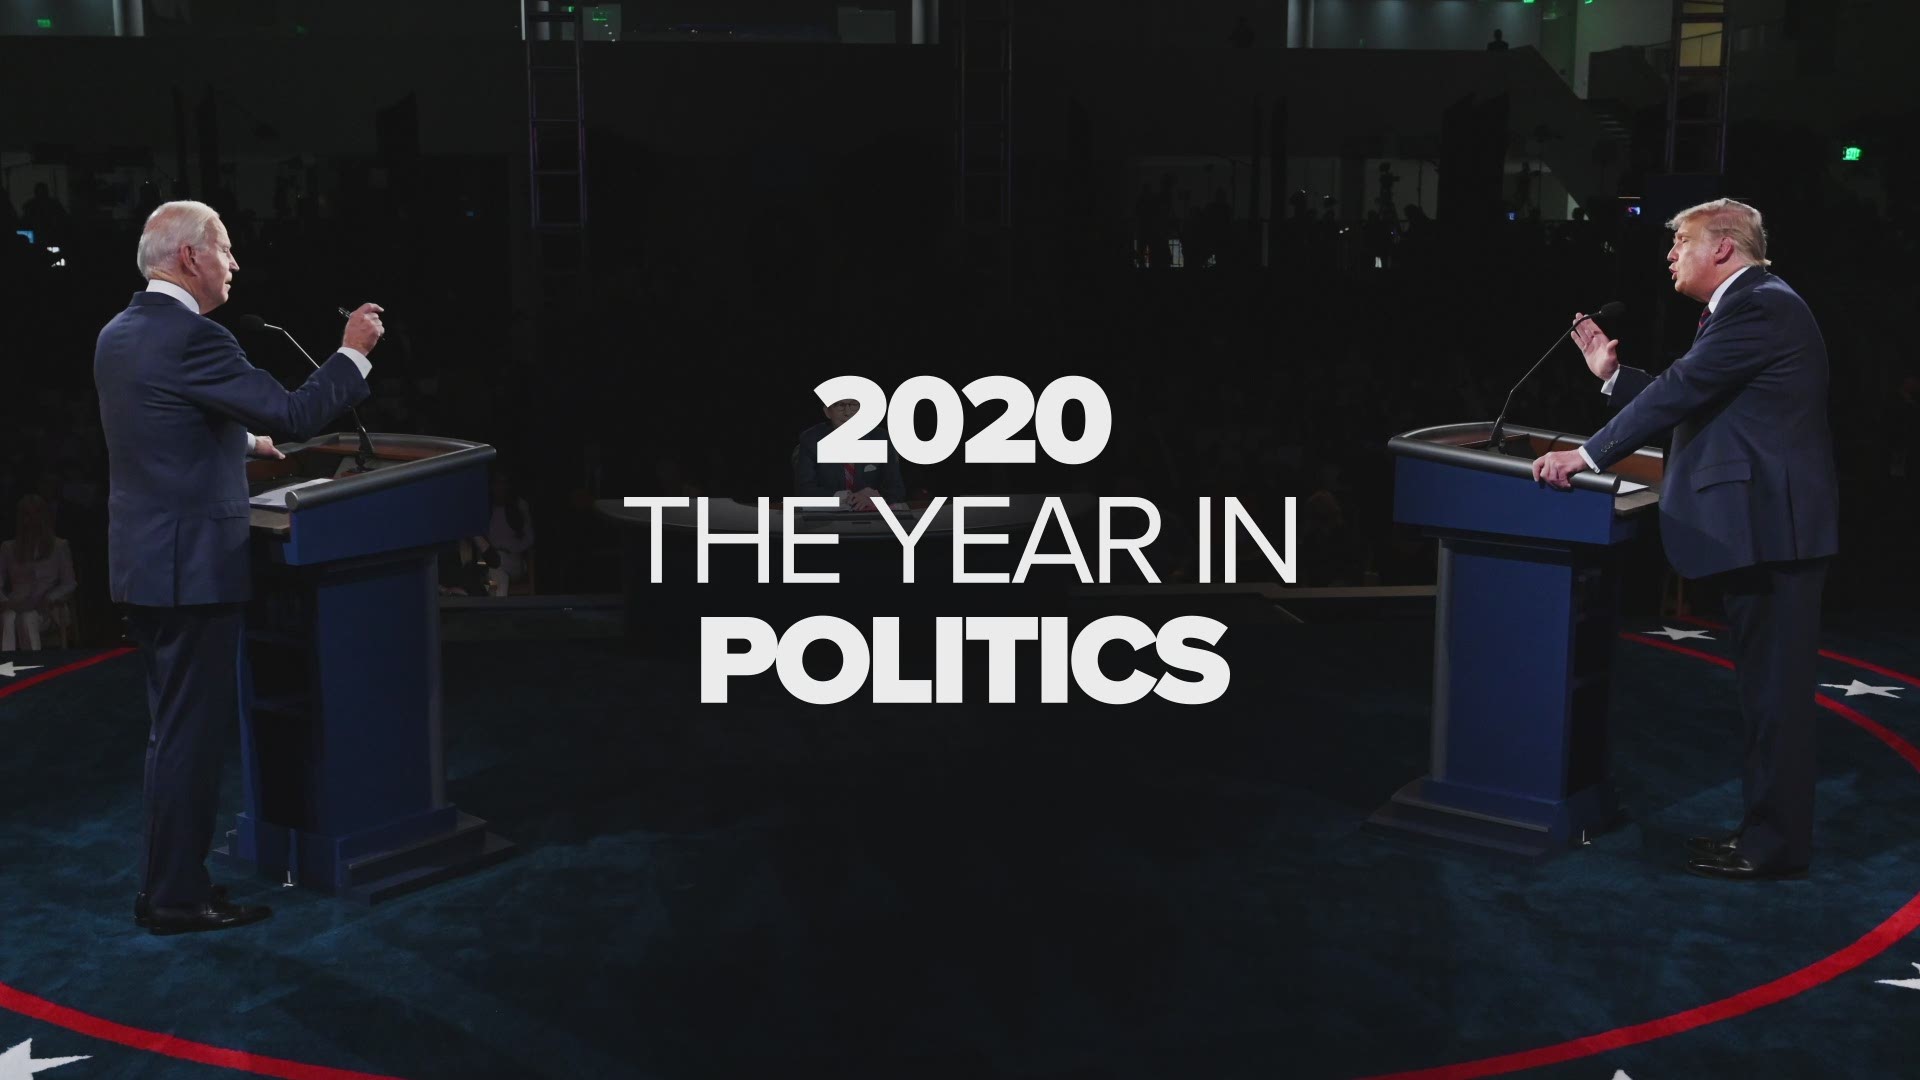 Dealing with the coronavirus, racial injustice protests and the presidential election, national leaders had their hands full as they battled the politics of 2020.